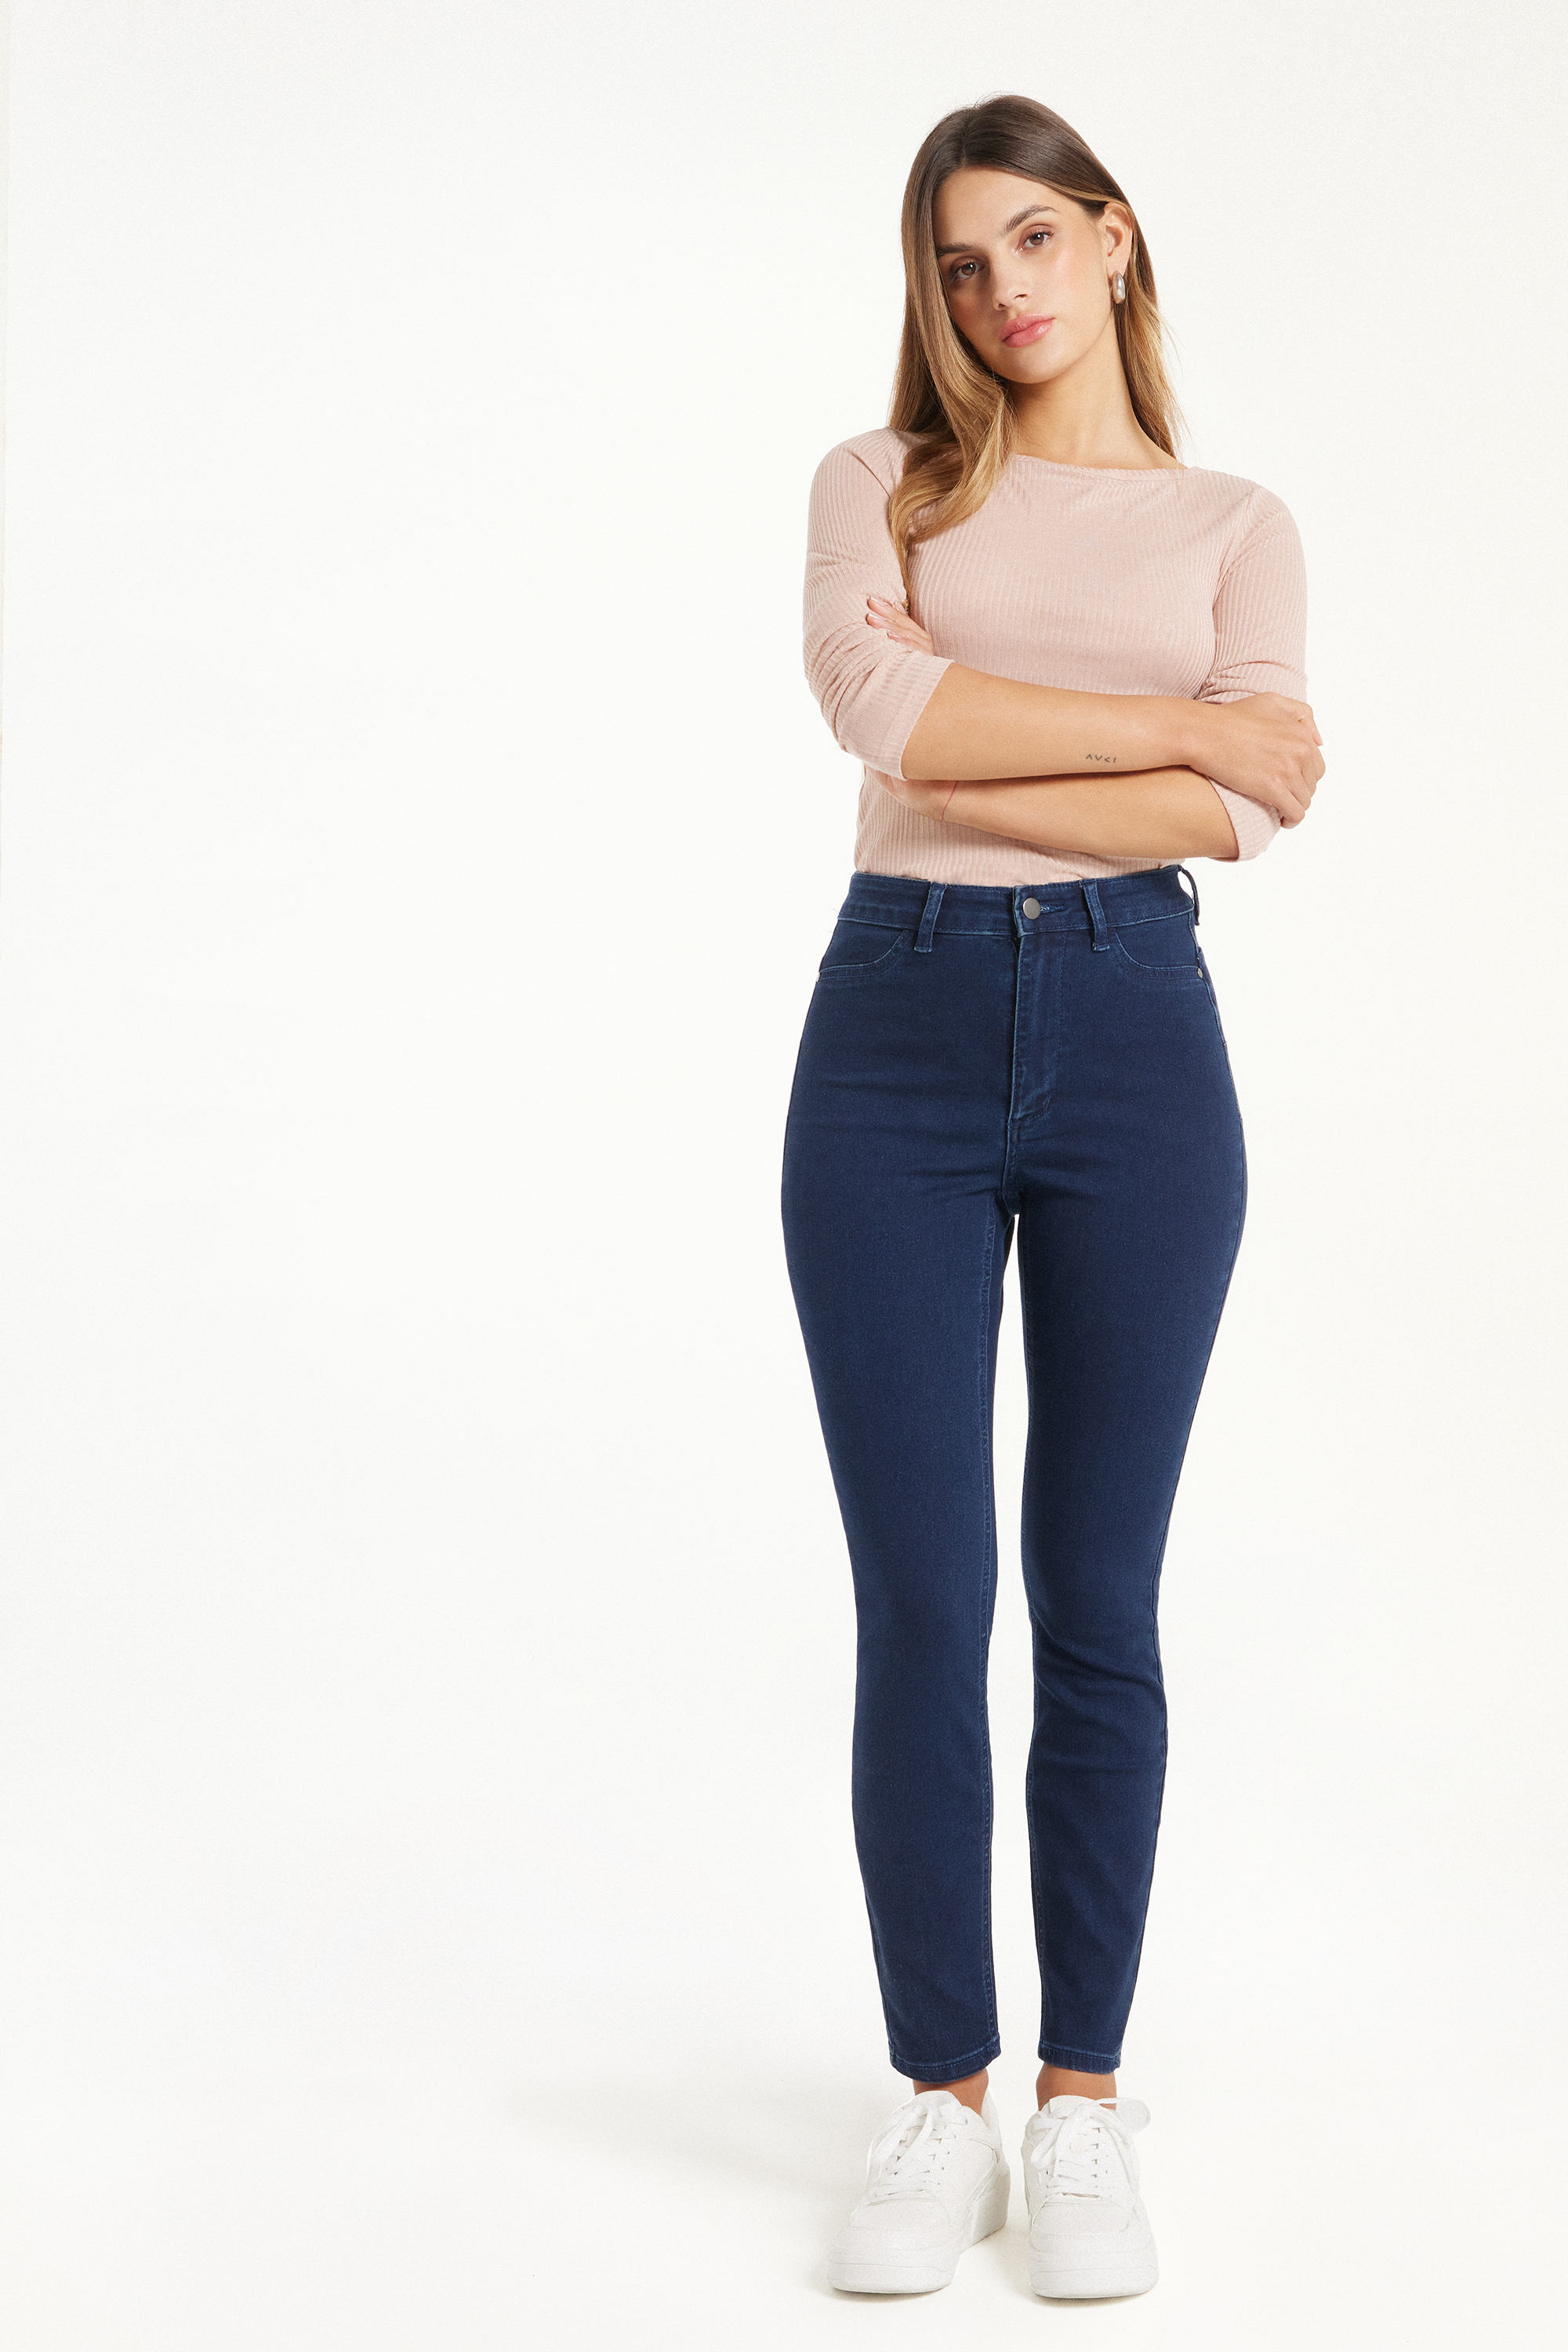 Jeggings Talle Alto Efecto Push-Up